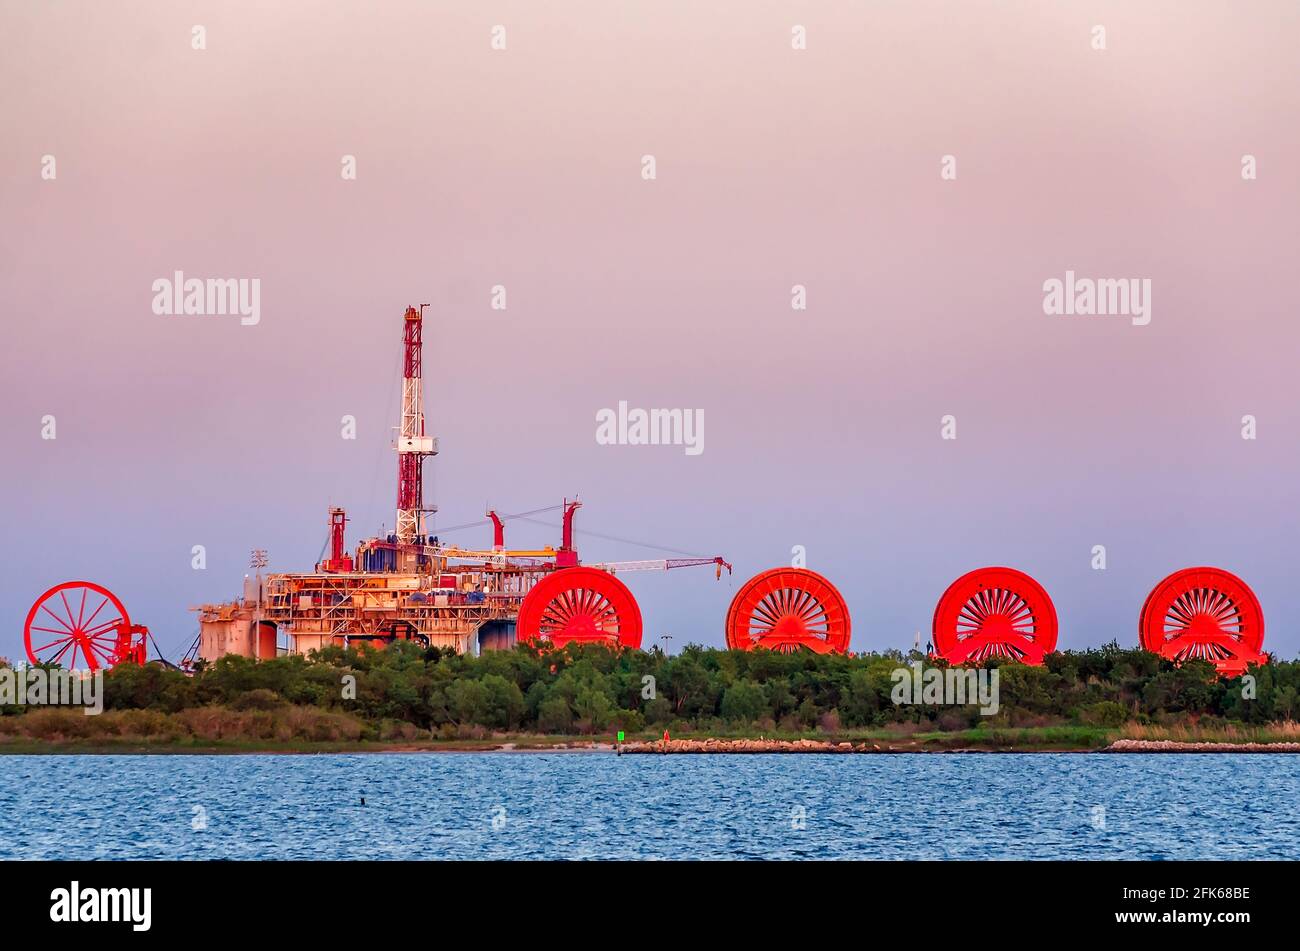 Reels used in the installation of subsea pipelines are seen at Halter Marine and Offshore, a subsidiary of ST Engineering, in Pascagoula, Mississippi. Stock Photo